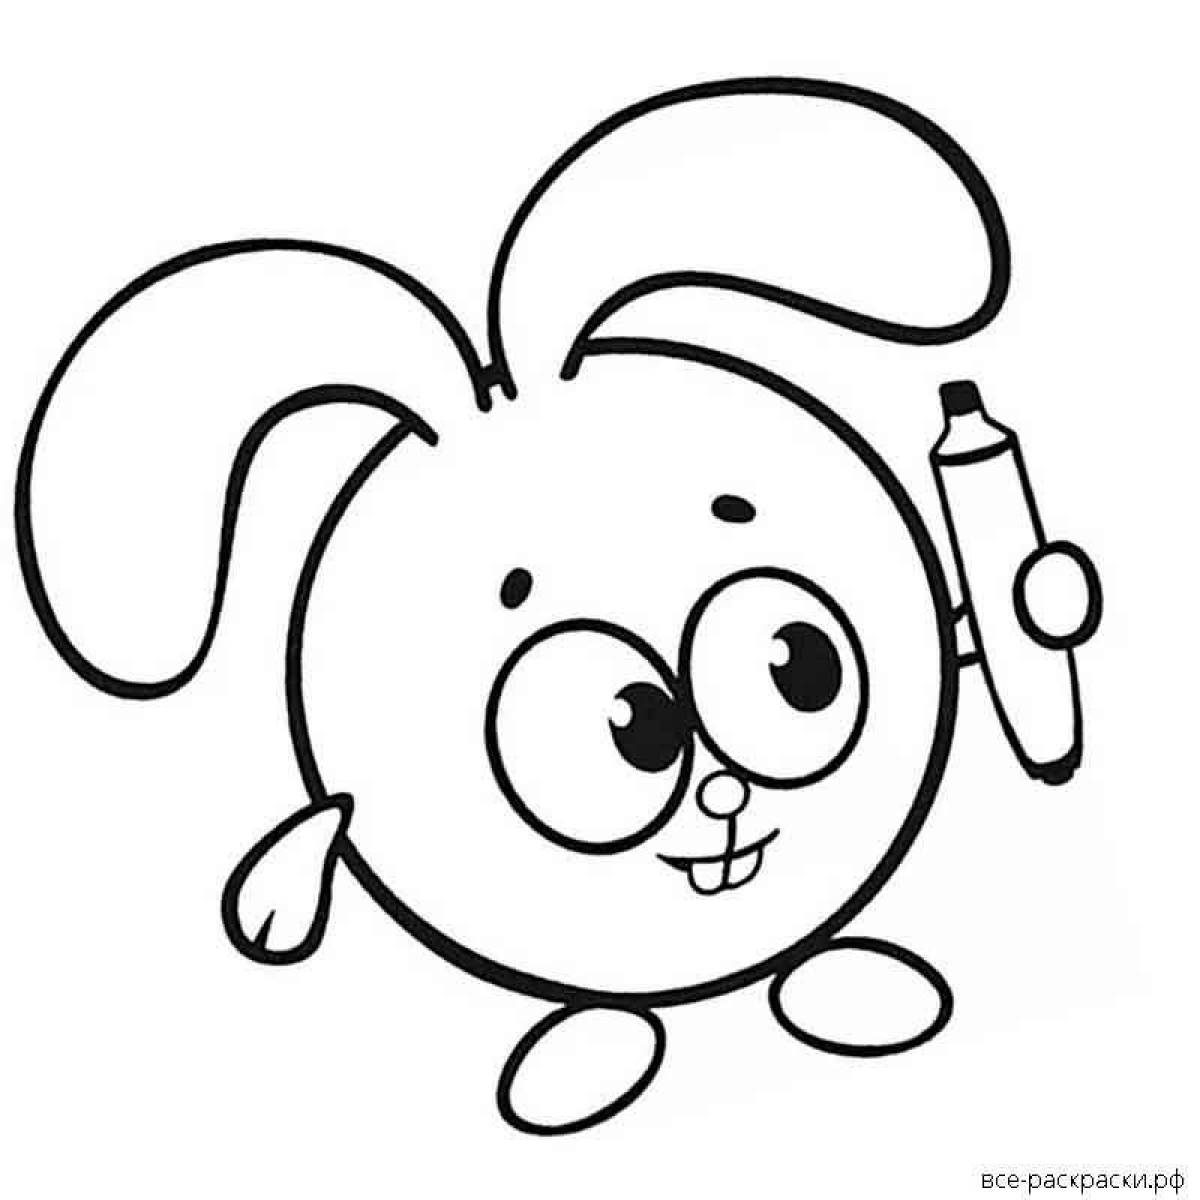 Adorable bell coloring page for little kids